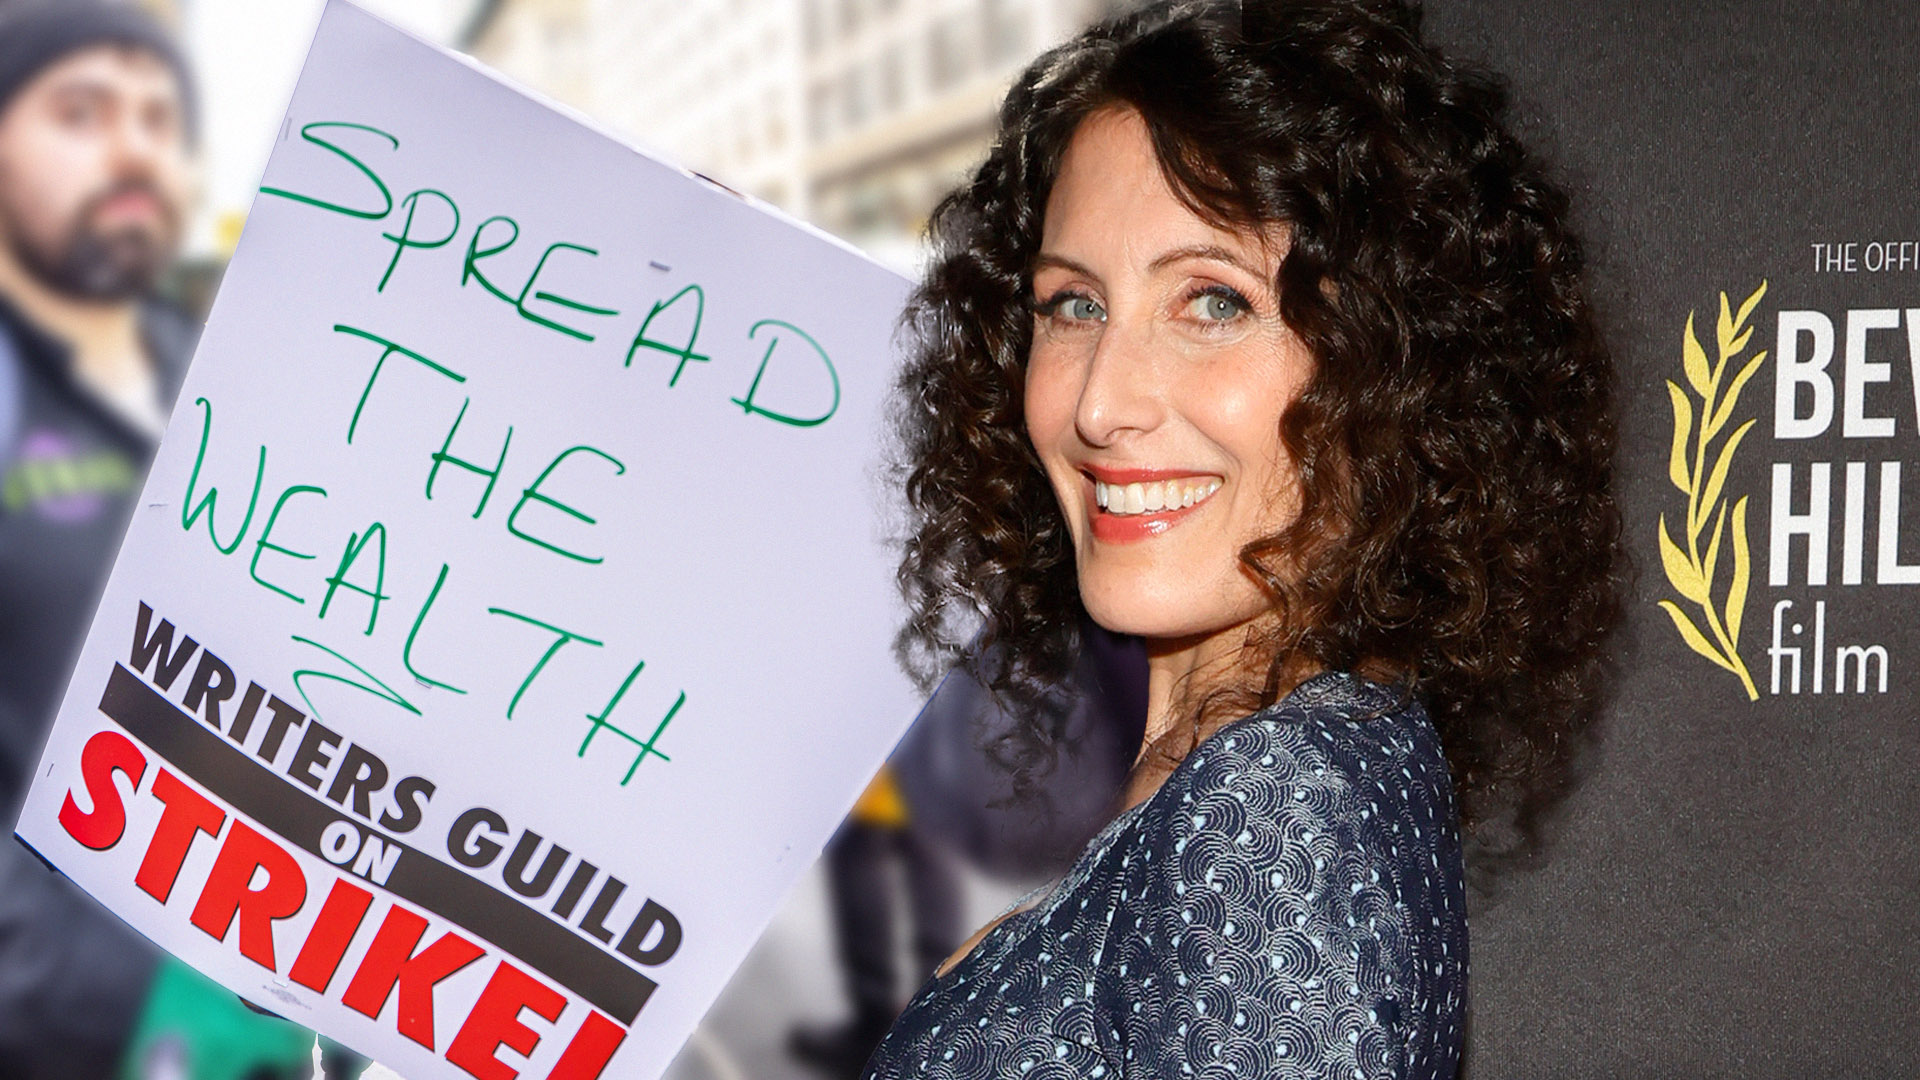 Lisa Edelstein's Residuals for Girlfriends' Guide to Divorce? Literally Pocket Change